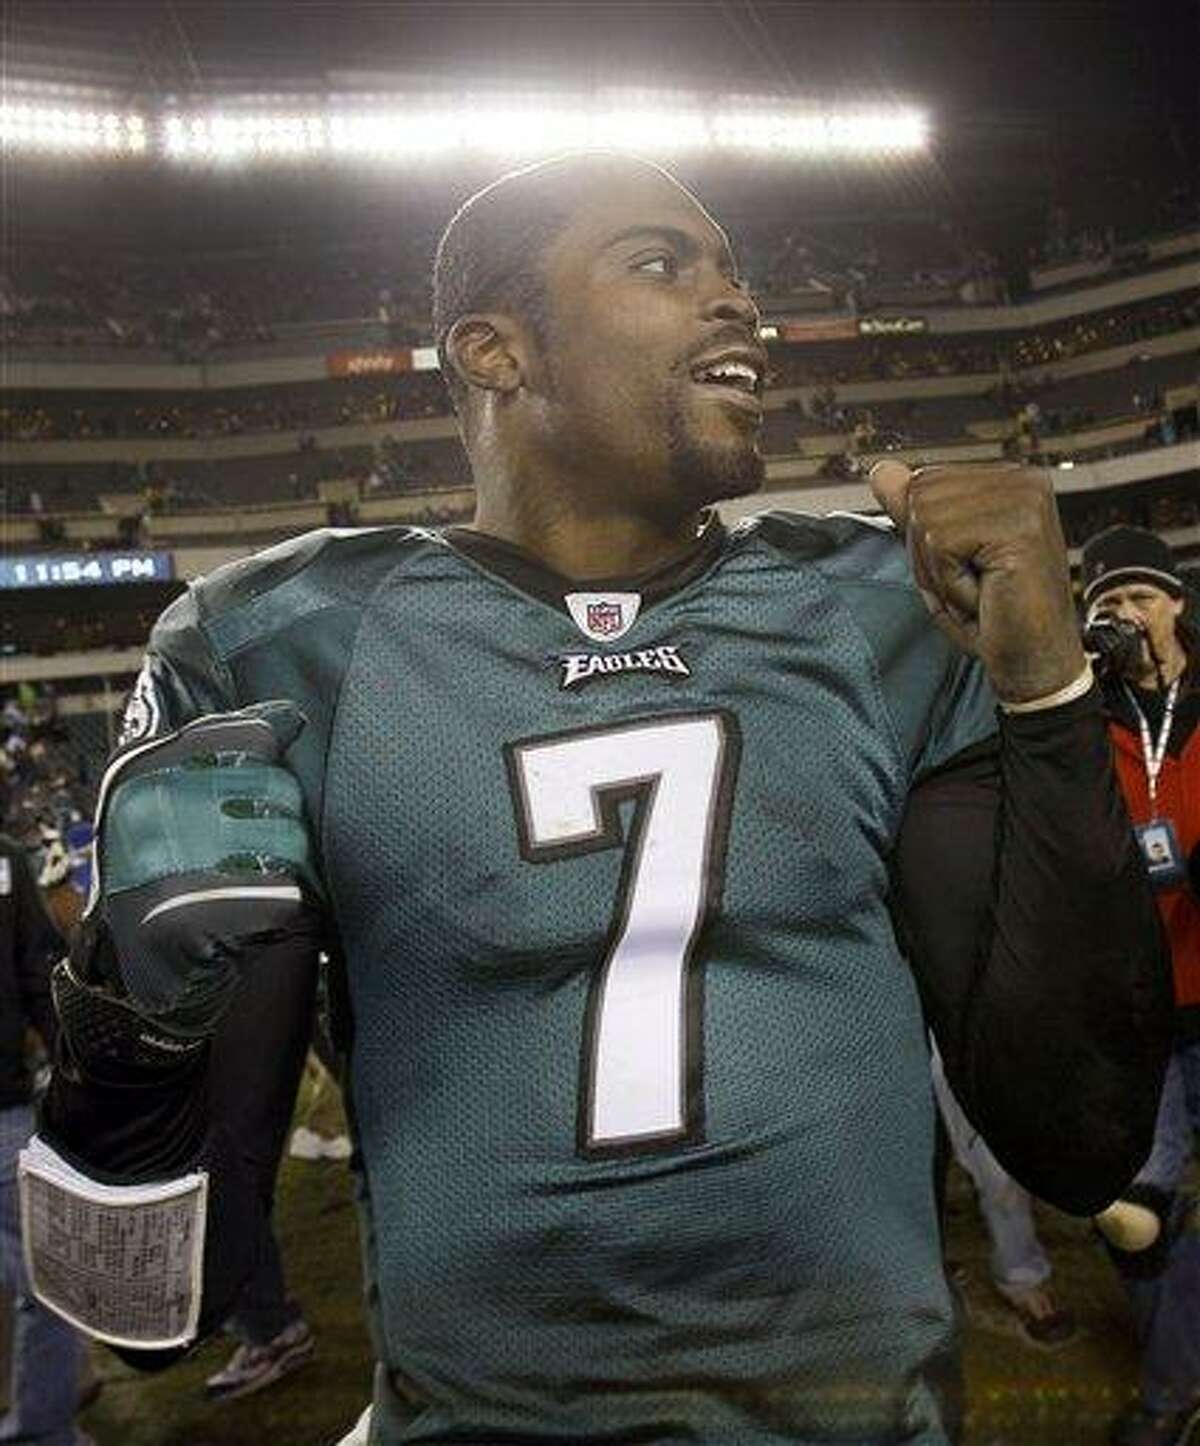 Philadelphia Eagles quarterback Michael Vick reacts to this team's victory as he leaves the field after an NFL football game against the New York Giants in Philadelphia, Monday, Nov. 22, 2010. The Eagles won 27 -17. (AP Photo/Matt Slocum)